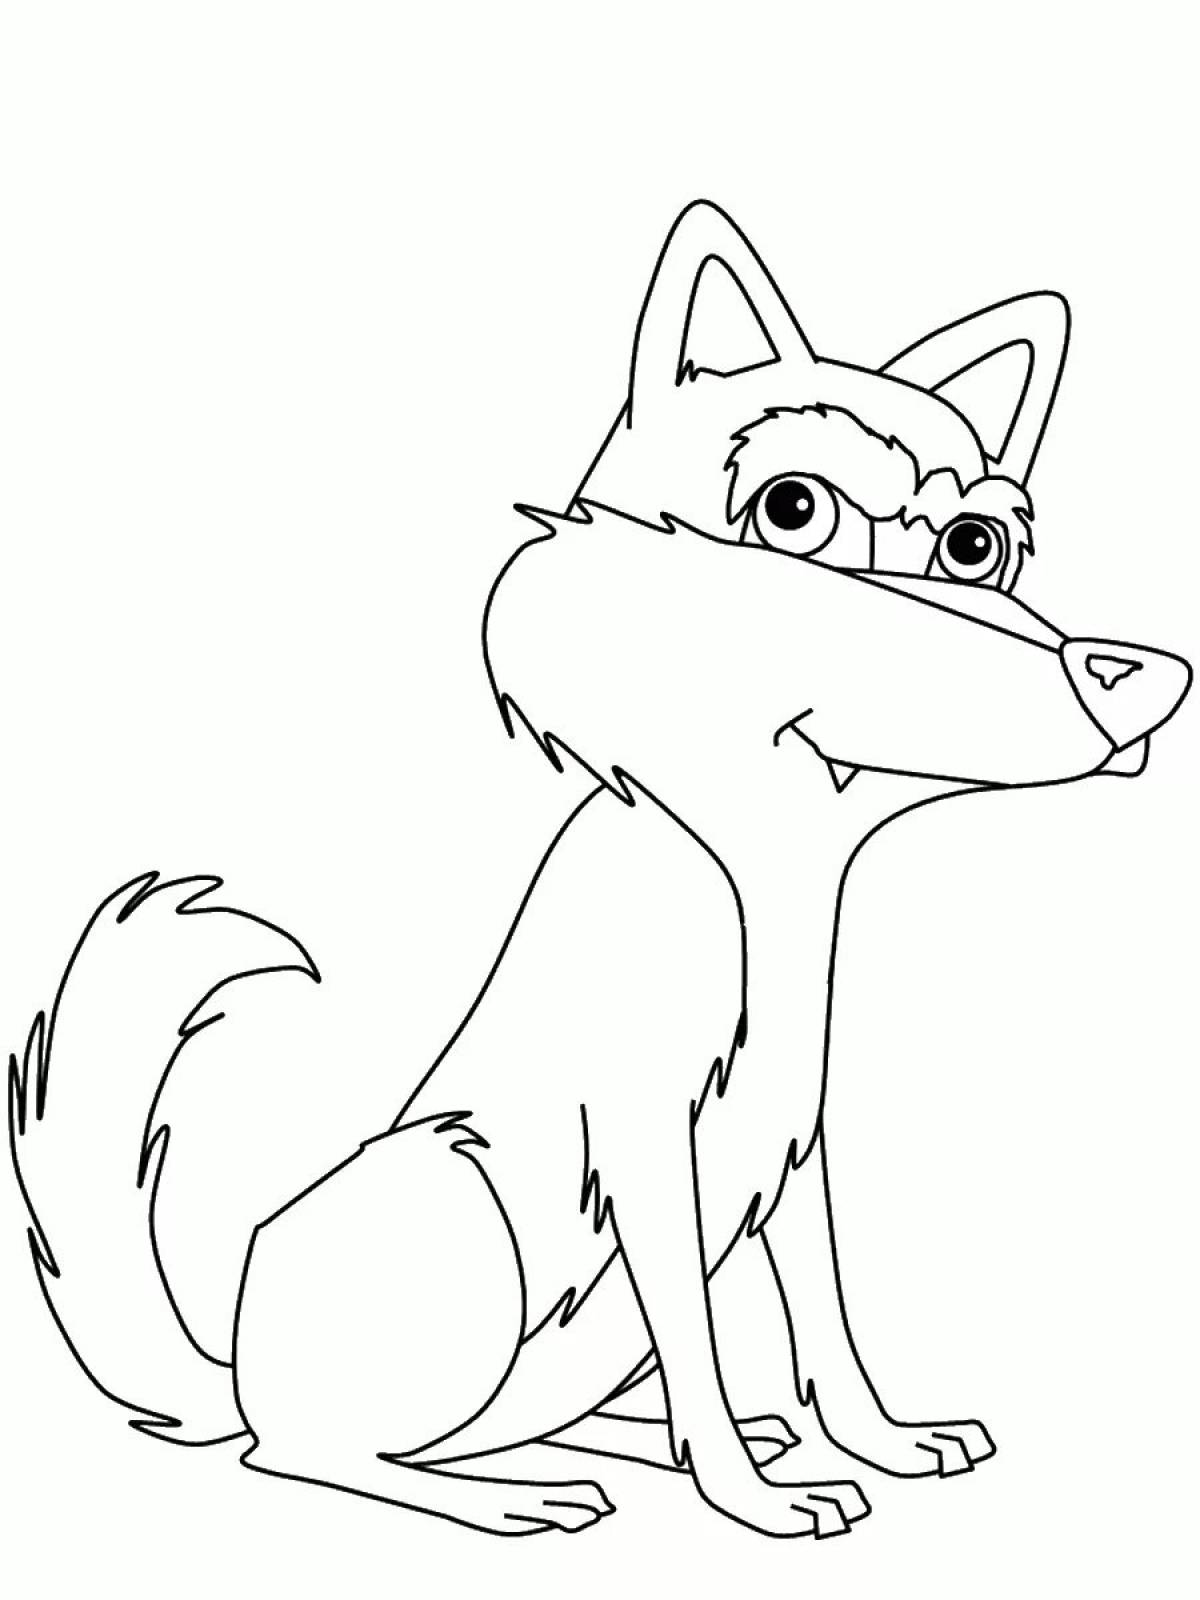 Fairy foxes and wolves coloring pages for kids